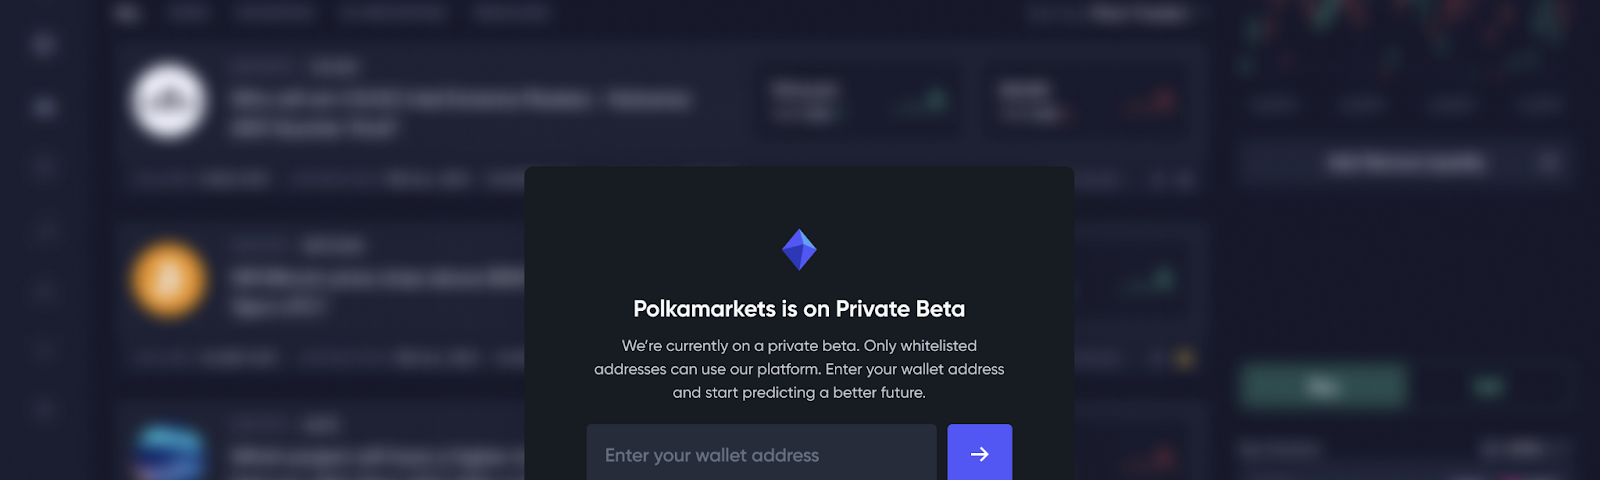 Polkamarkets Private Beta: Fill in your wallet address to check if you’re whitelisted